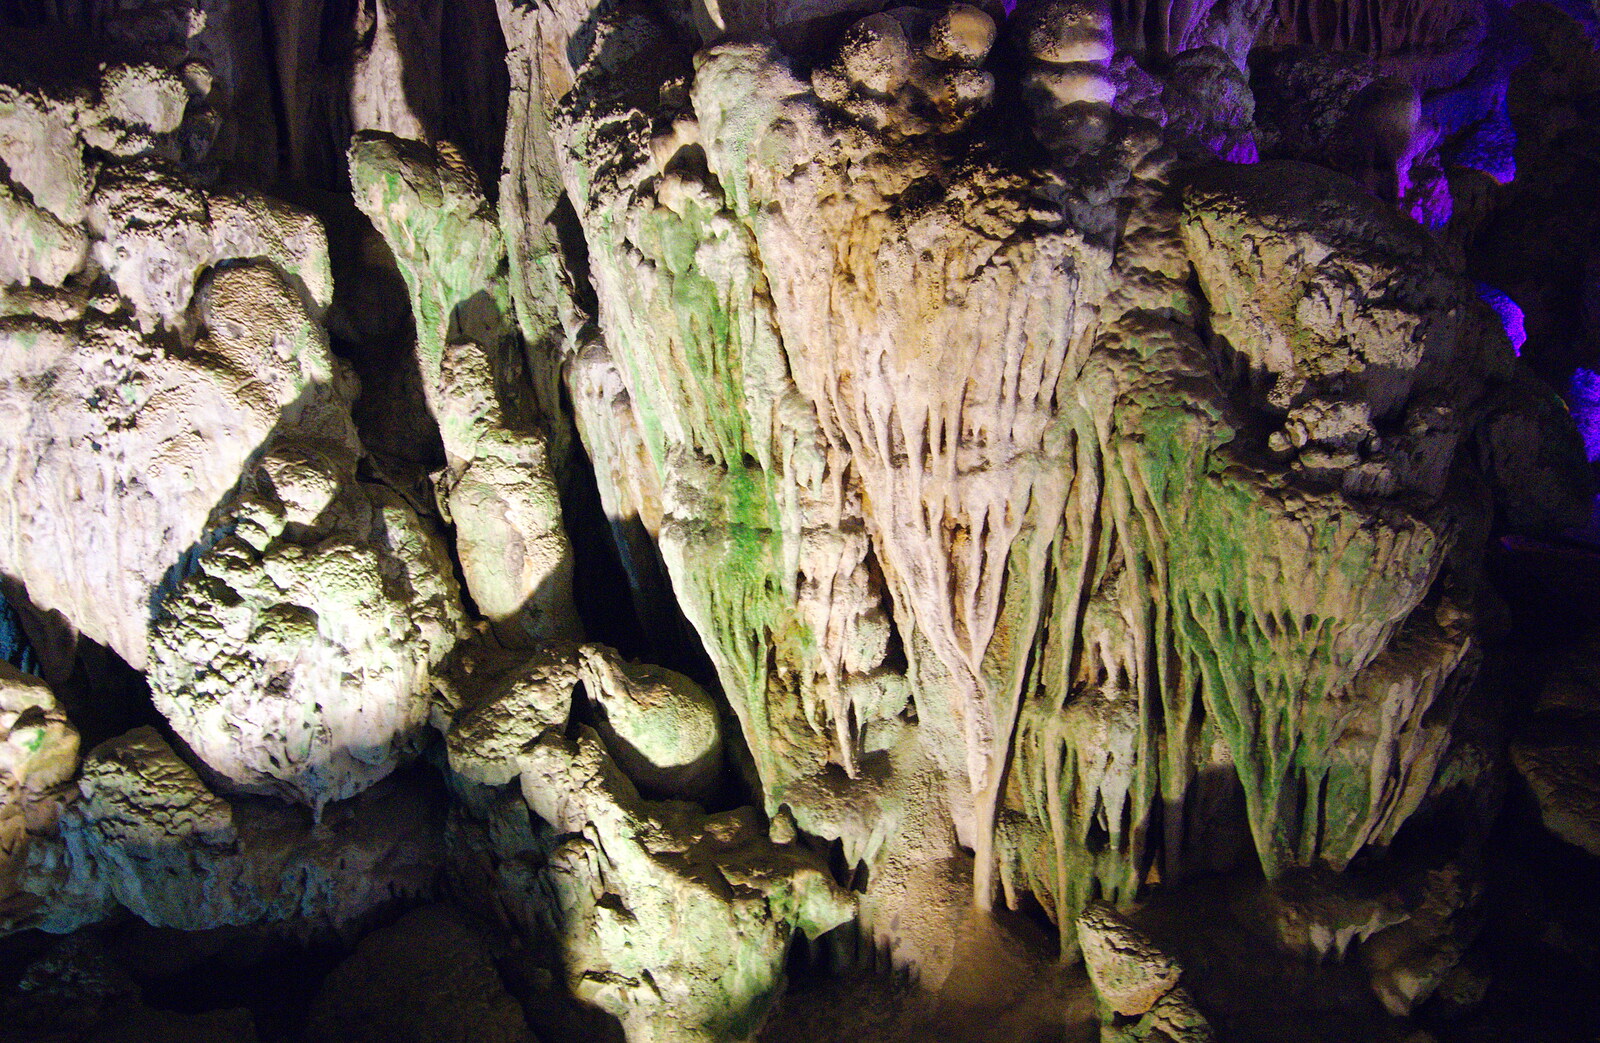 Places with light have got 'the green disease' from The Caves of Nerja, and Frigiliana, Andalusia, Spain - 18th April 2019